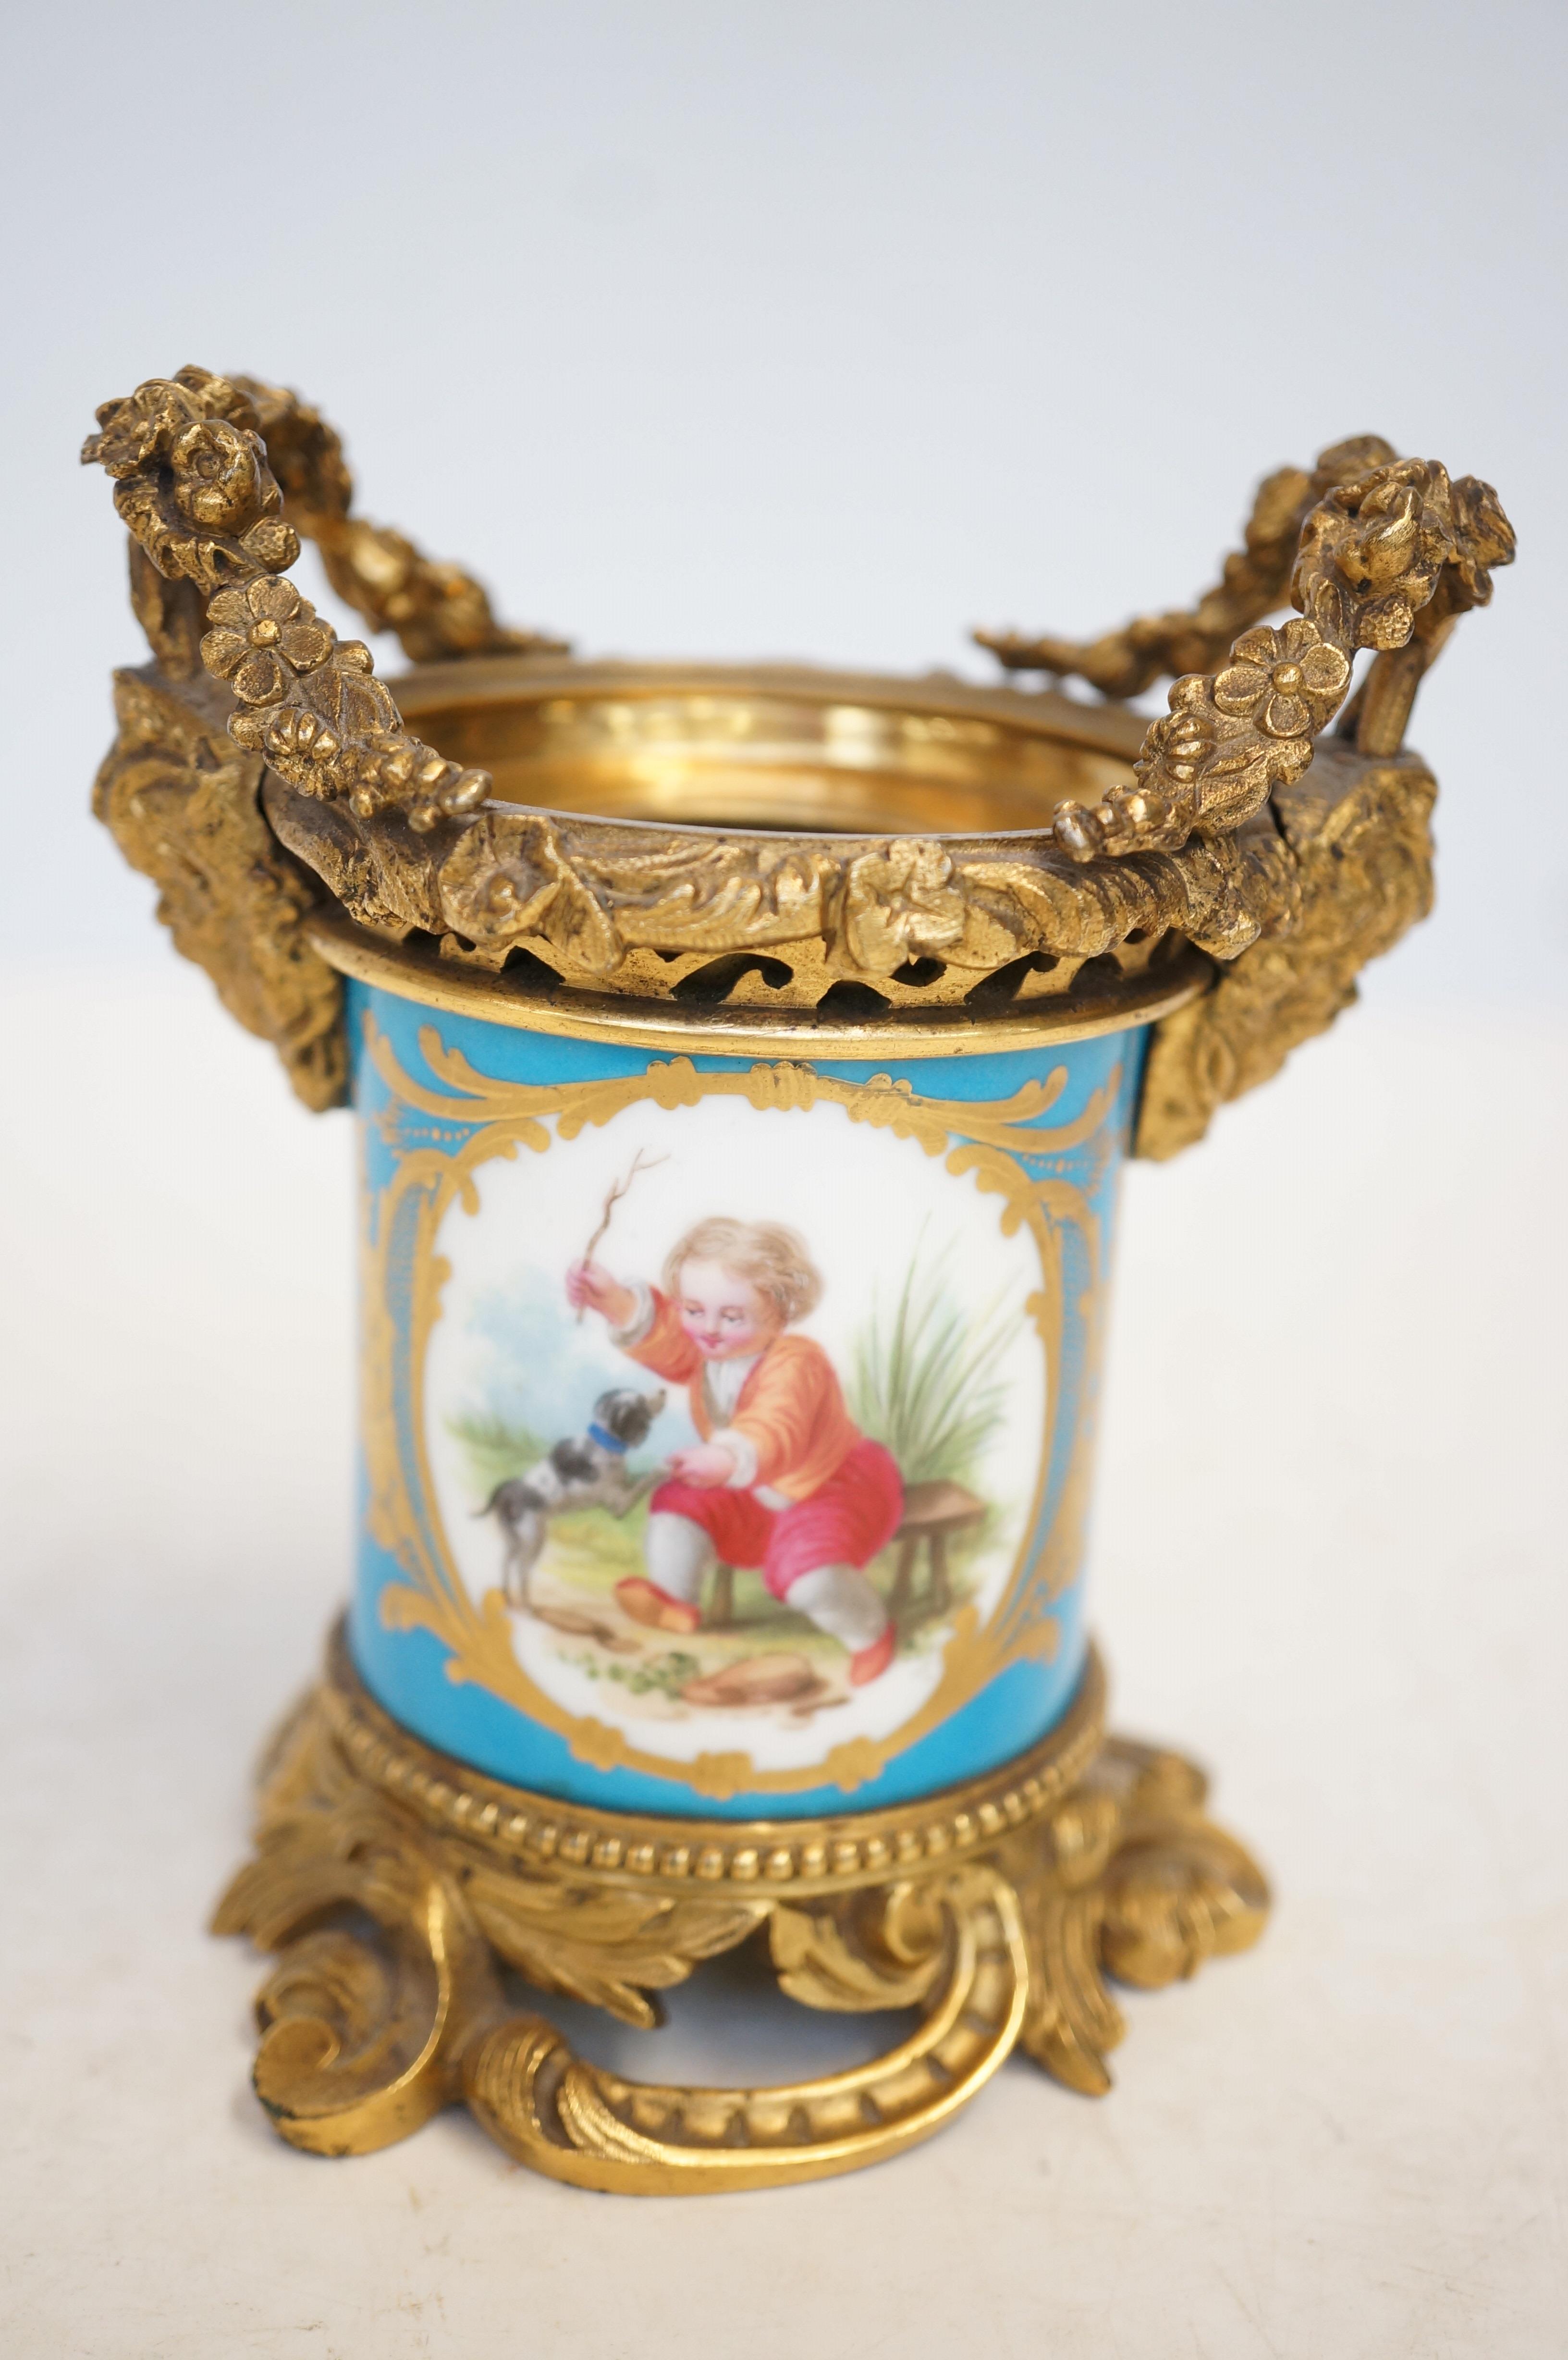 Sevres hand painted & gilt bronze pot (no cover) hair line to blue on side & blemish Height 13 cm